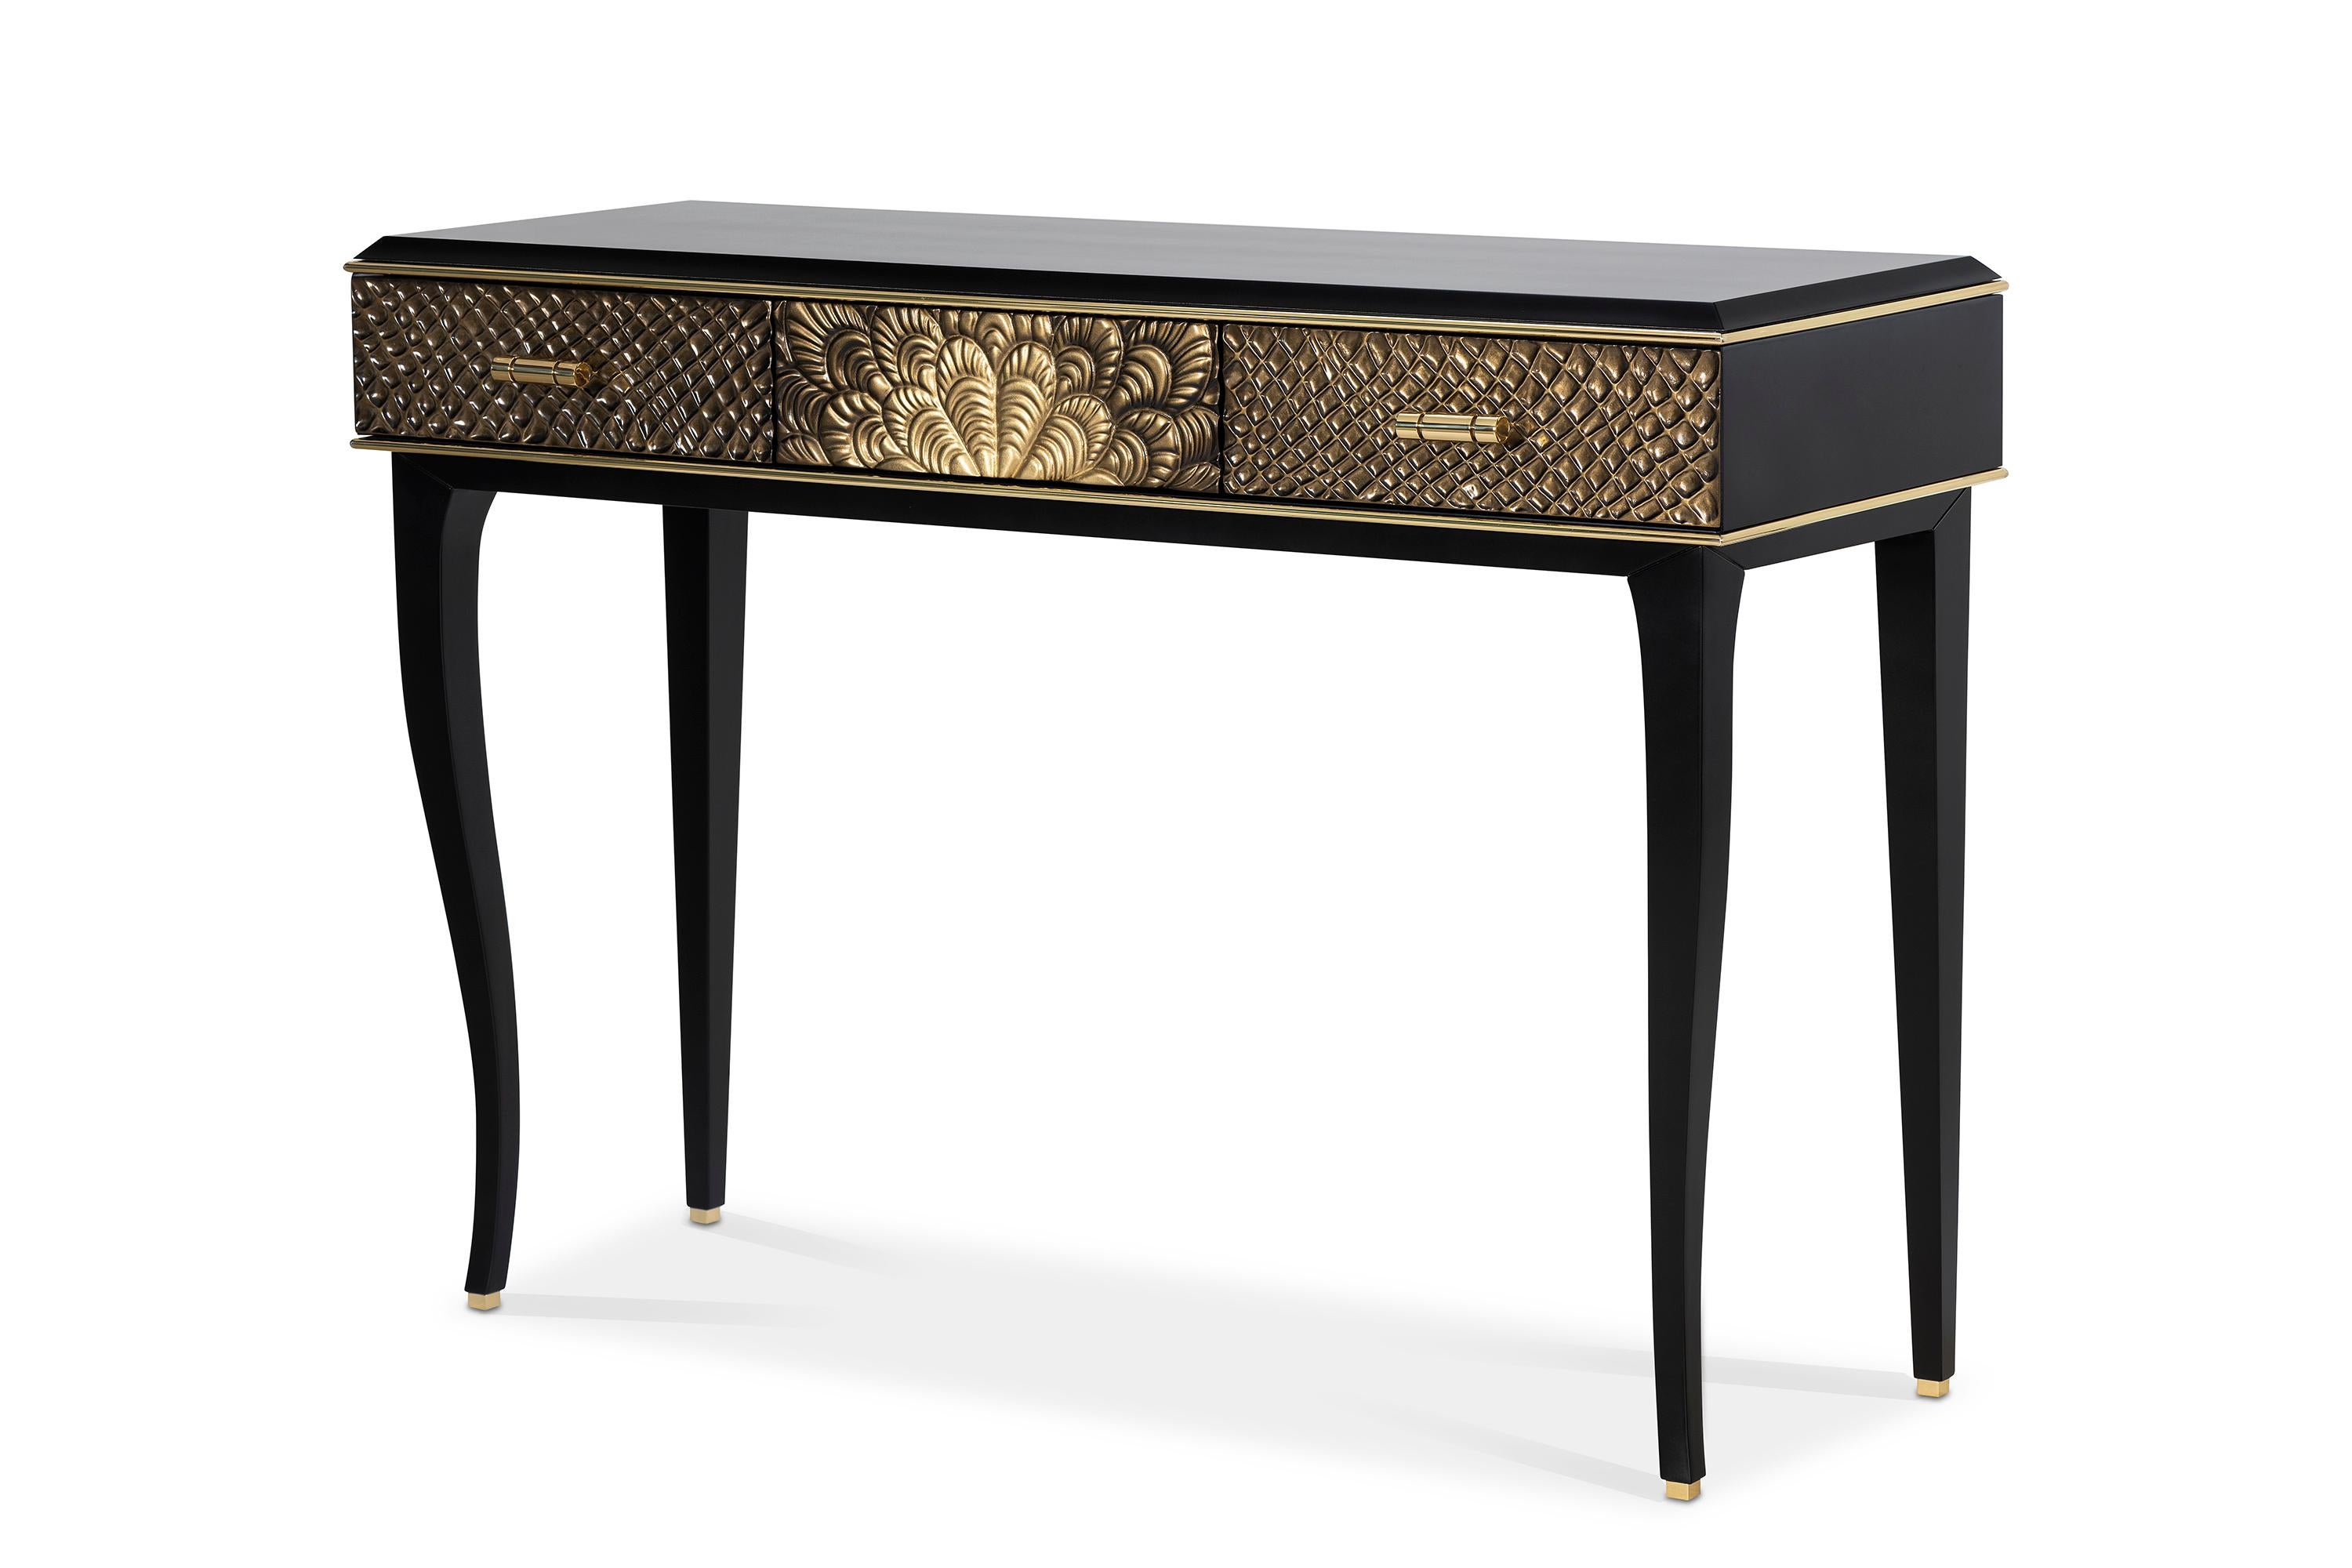 Georgiana console it's a mysterious piece that creates feelings through the colors and the different materials such as the textured, the black lacquered and the polished brass.

The textures presented in the drawers, the golden frieze in